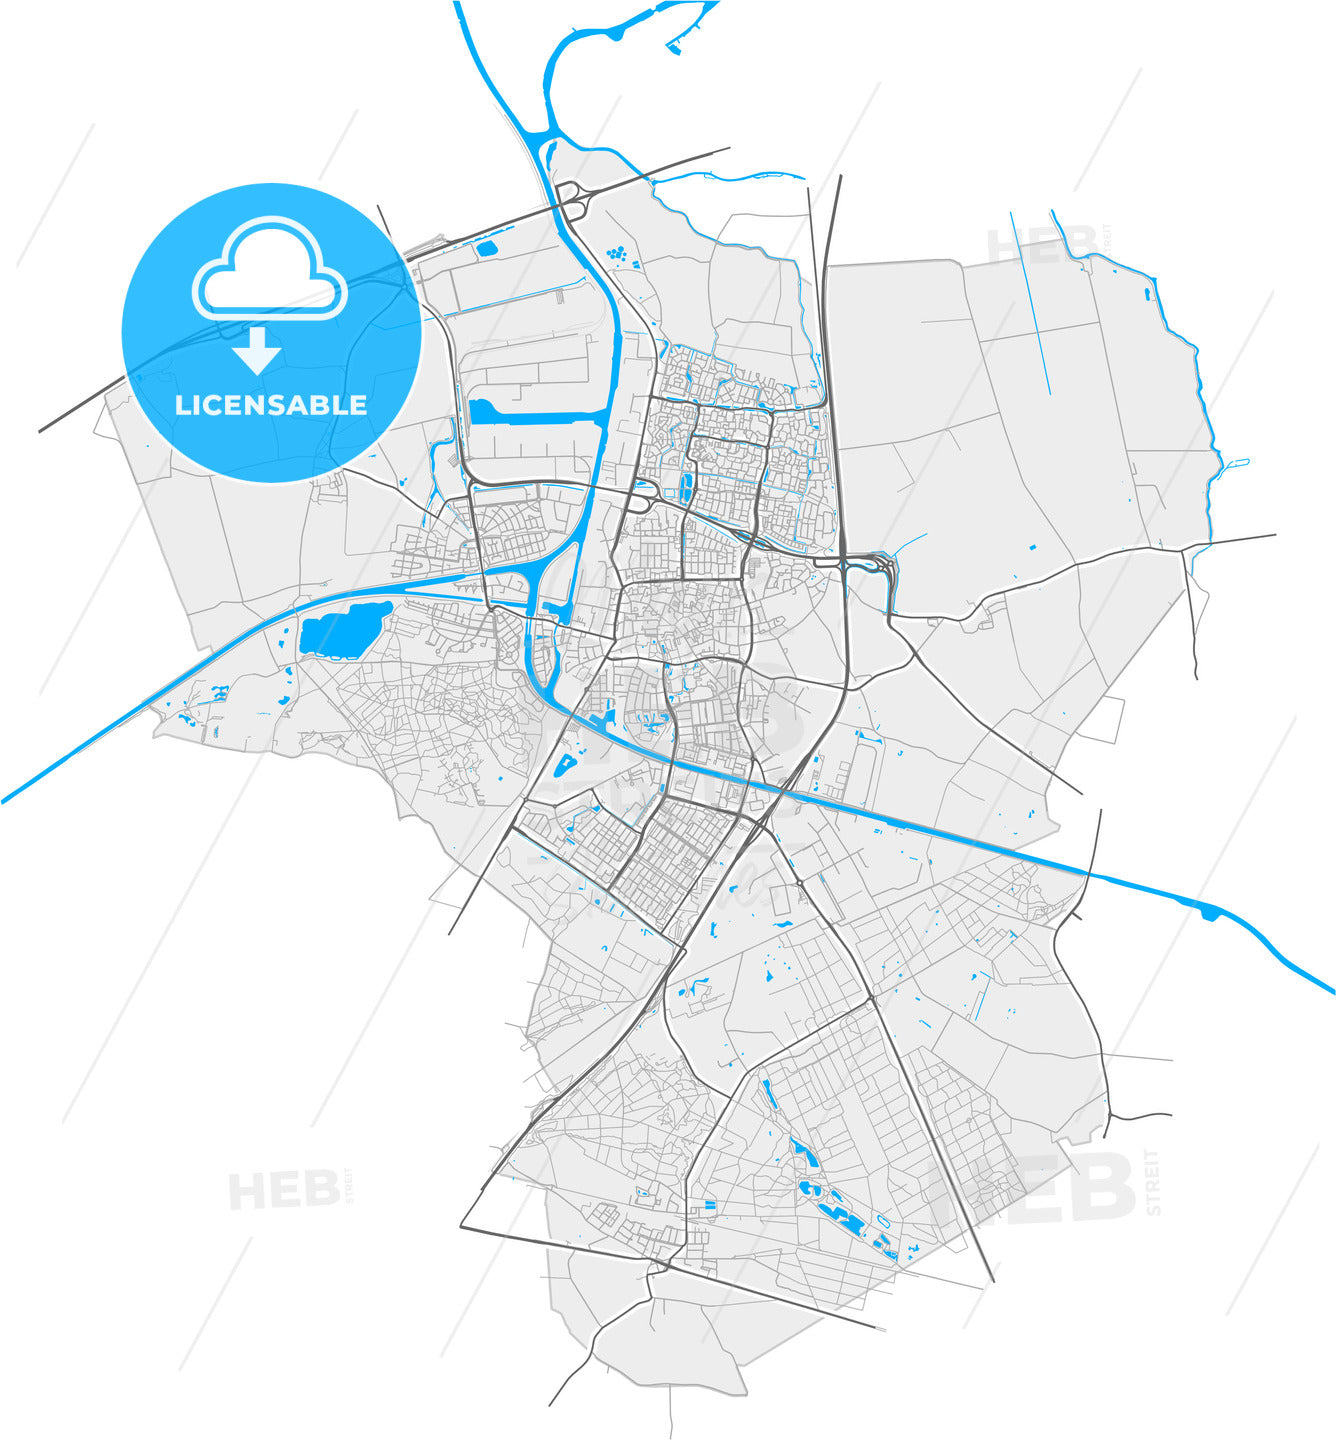 Oosterhout, North Brabant, Netherlands, high quality vector map